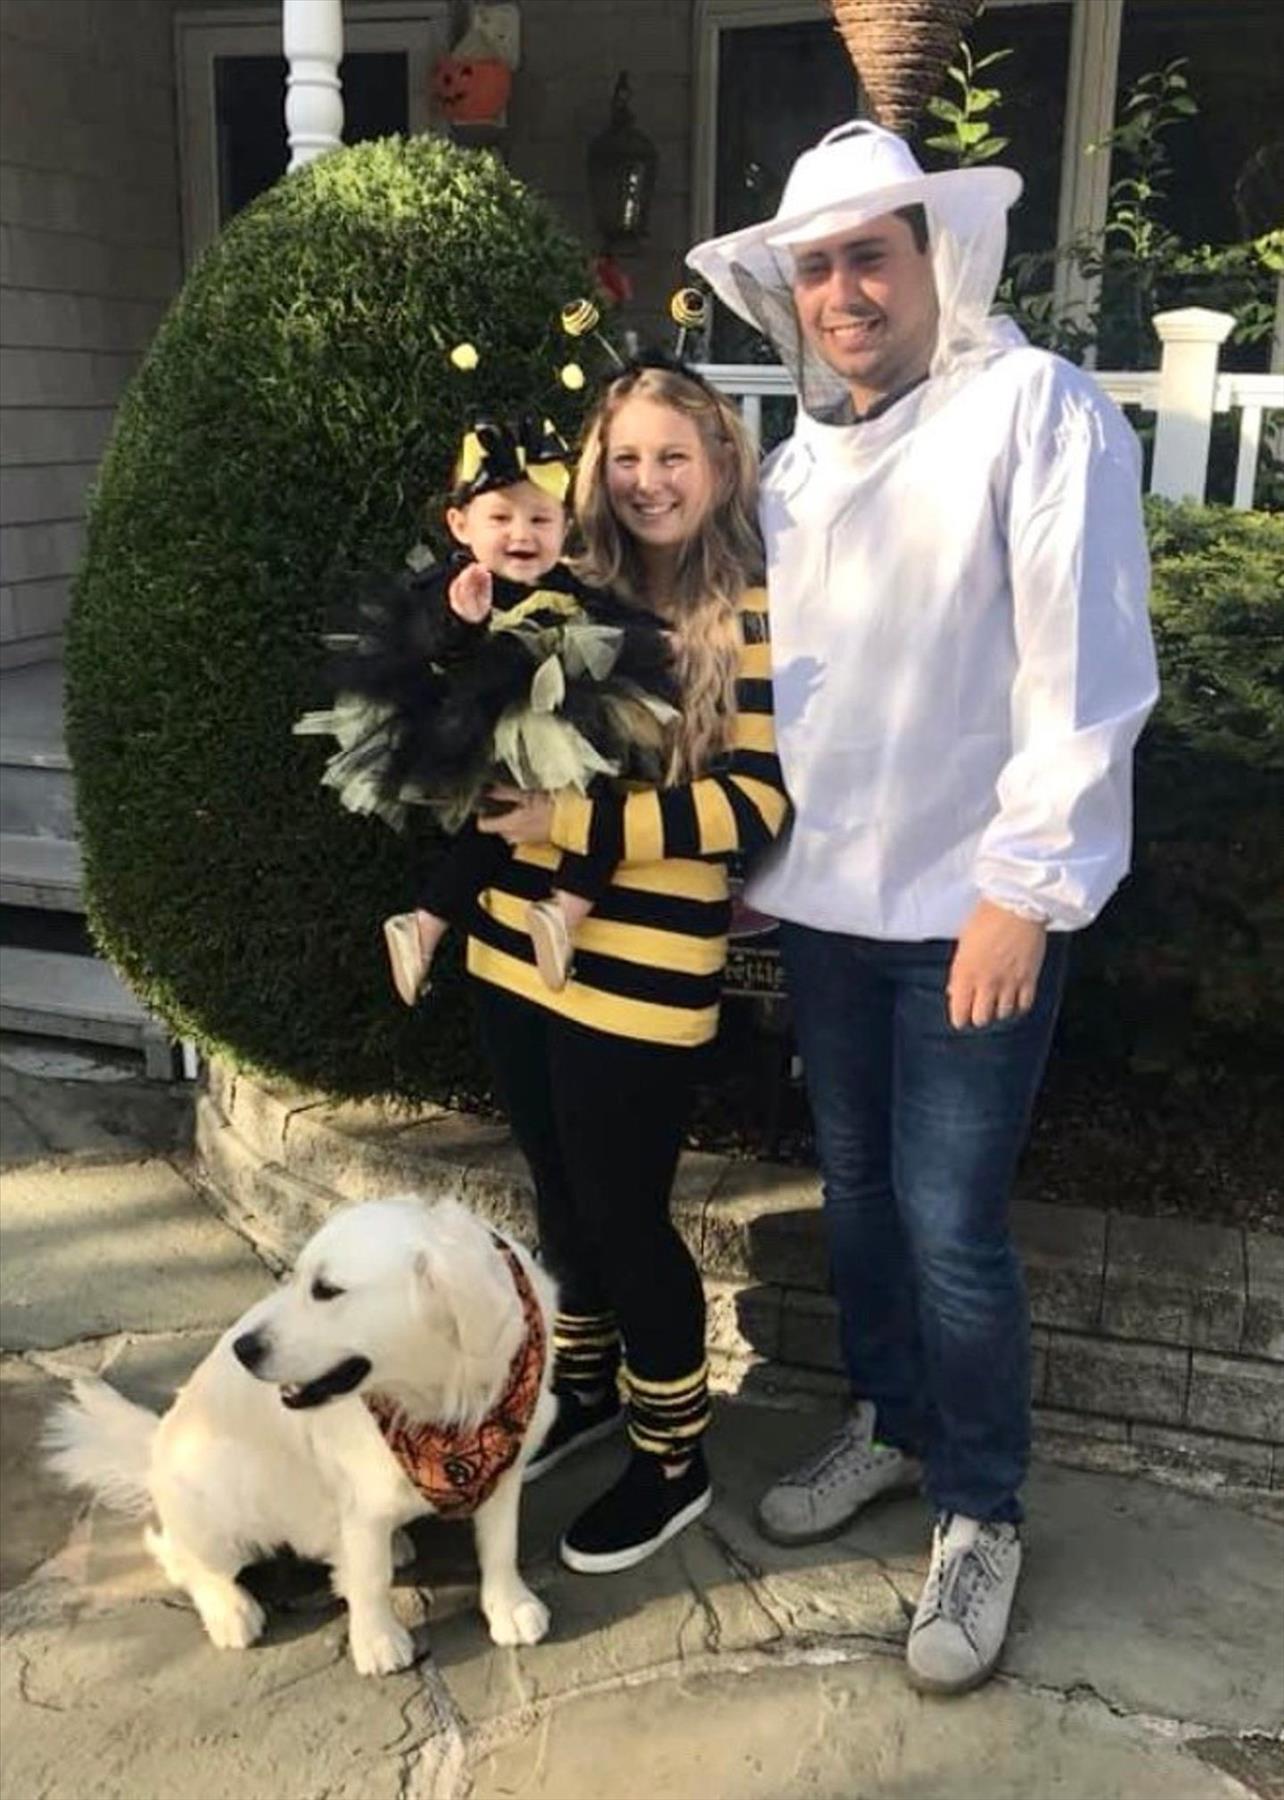 Creative Family Halloween Costumes You’ll Want to Try